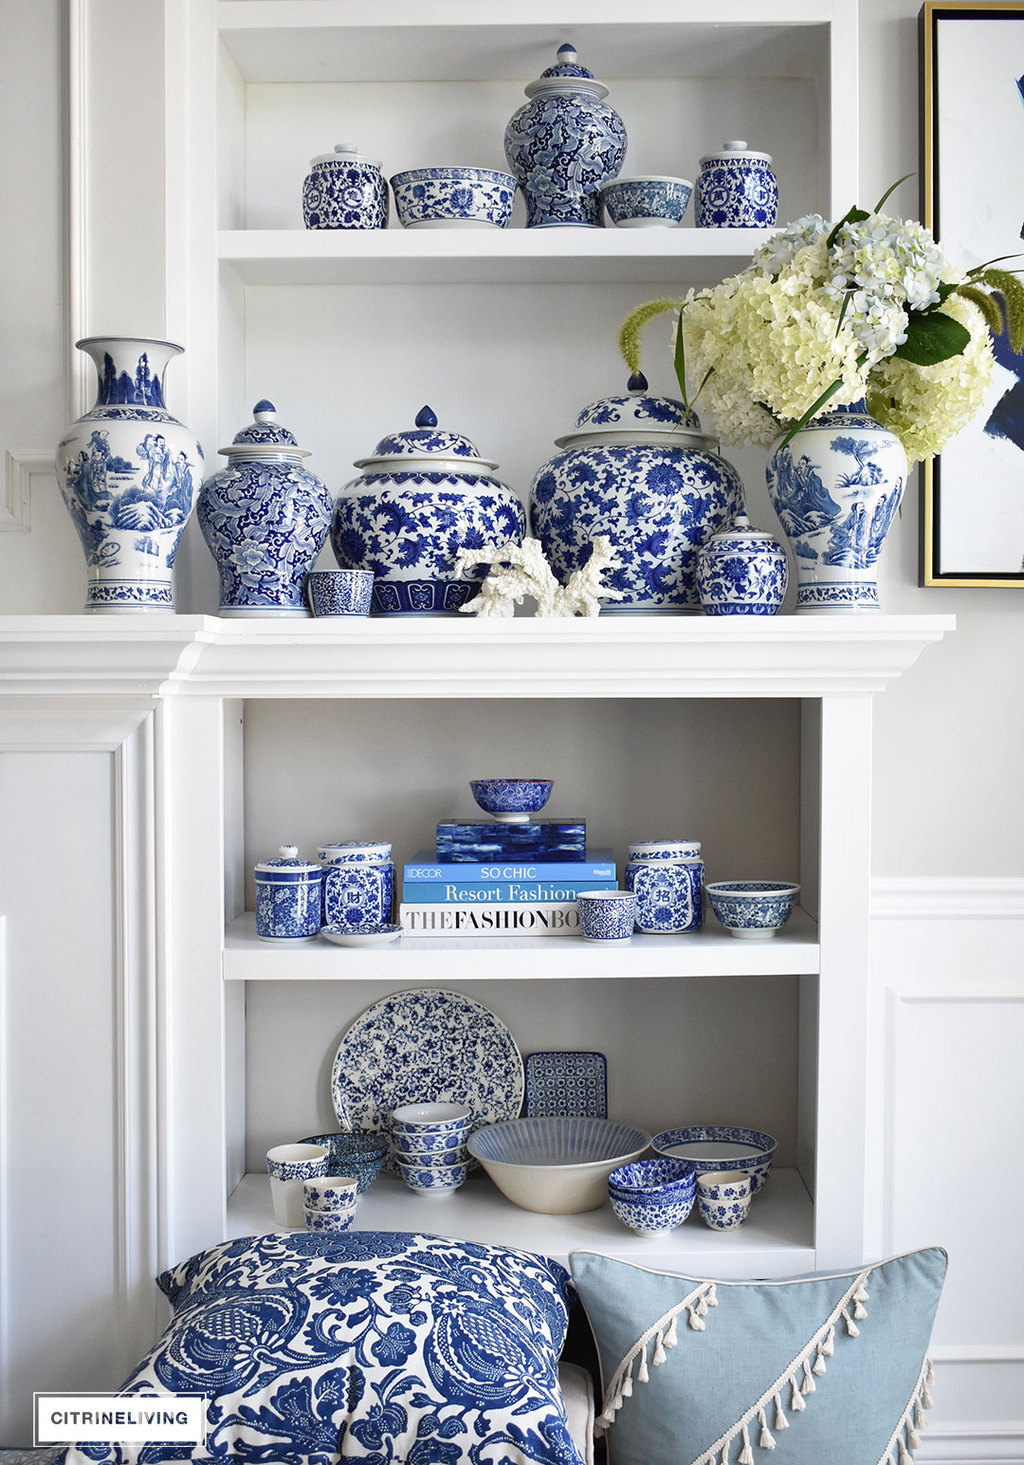 A beautiful collection of blue and white ginger jars, vases, bowls and dishes can be showcased and used anywhere throughout your home. Pair it with any color scheme and use it through any season of the year - this timeless classic will never go out of style!